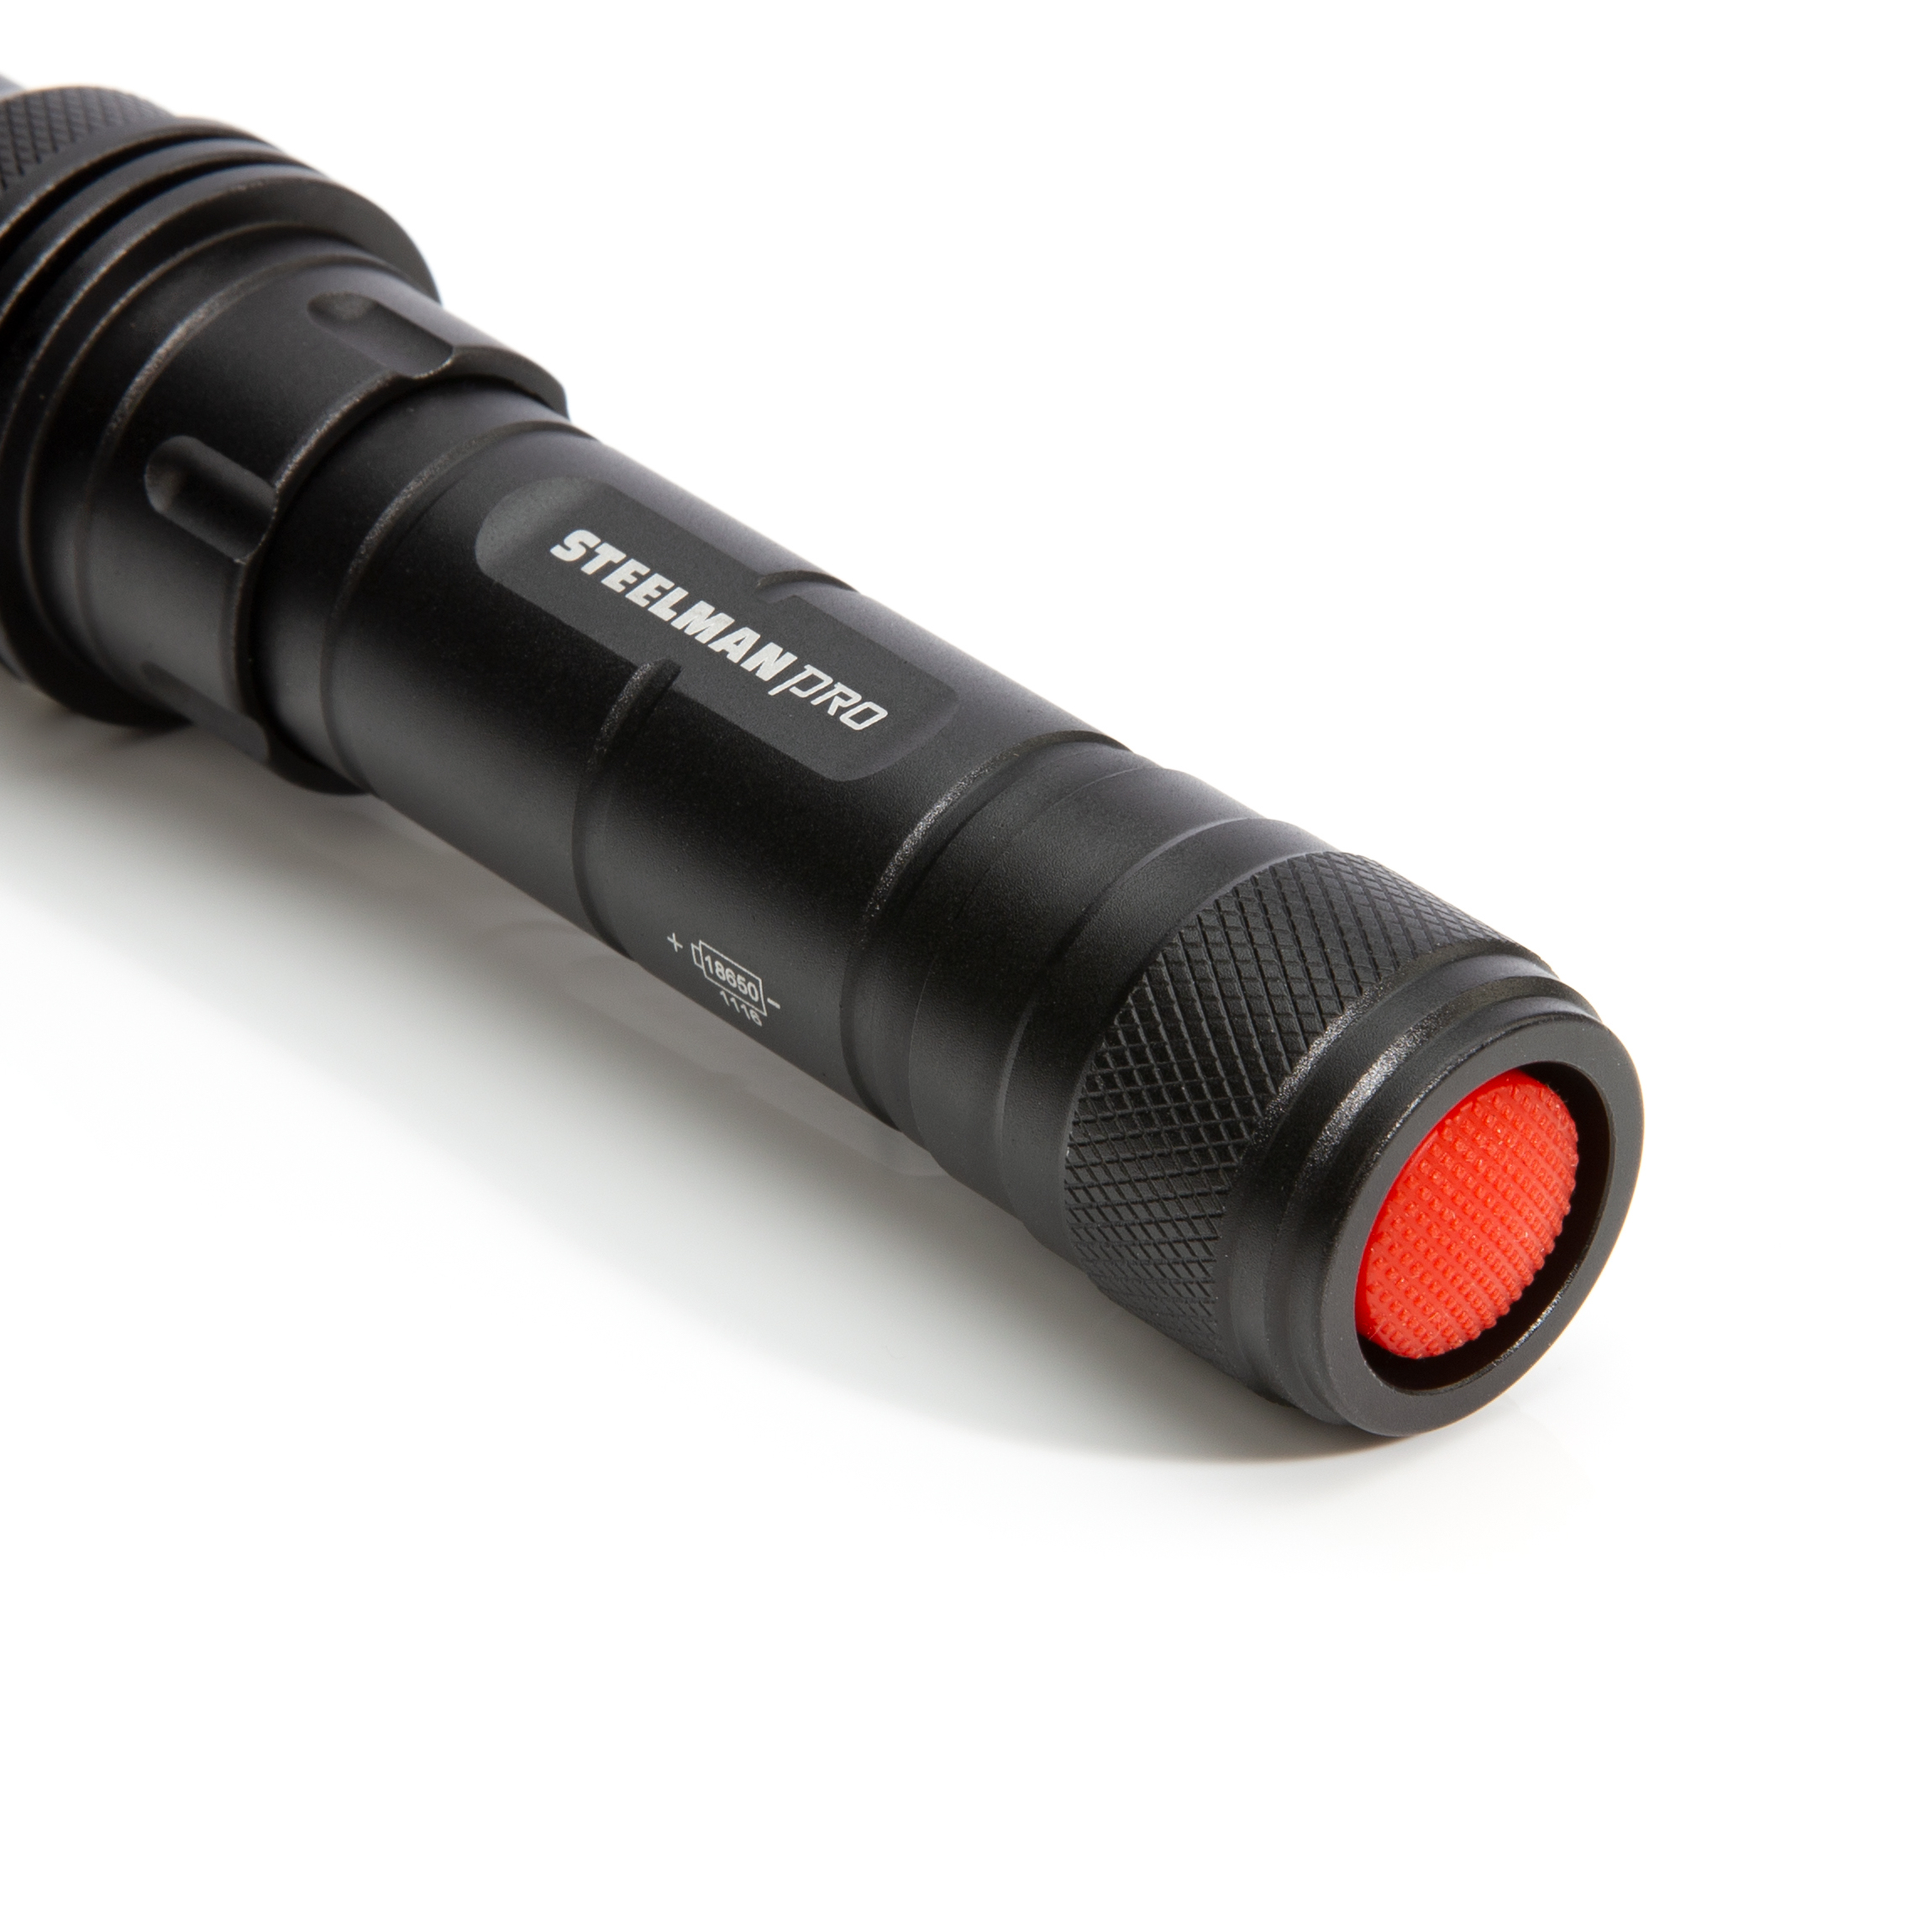 STEELMAN PRO 96883 700 Lumen CREE LED Rechargeable Tactical Flashlight; with additional UV Head; High, Low, and Strobe modes; IPX4 Water-resistant rated - image 2 of 8